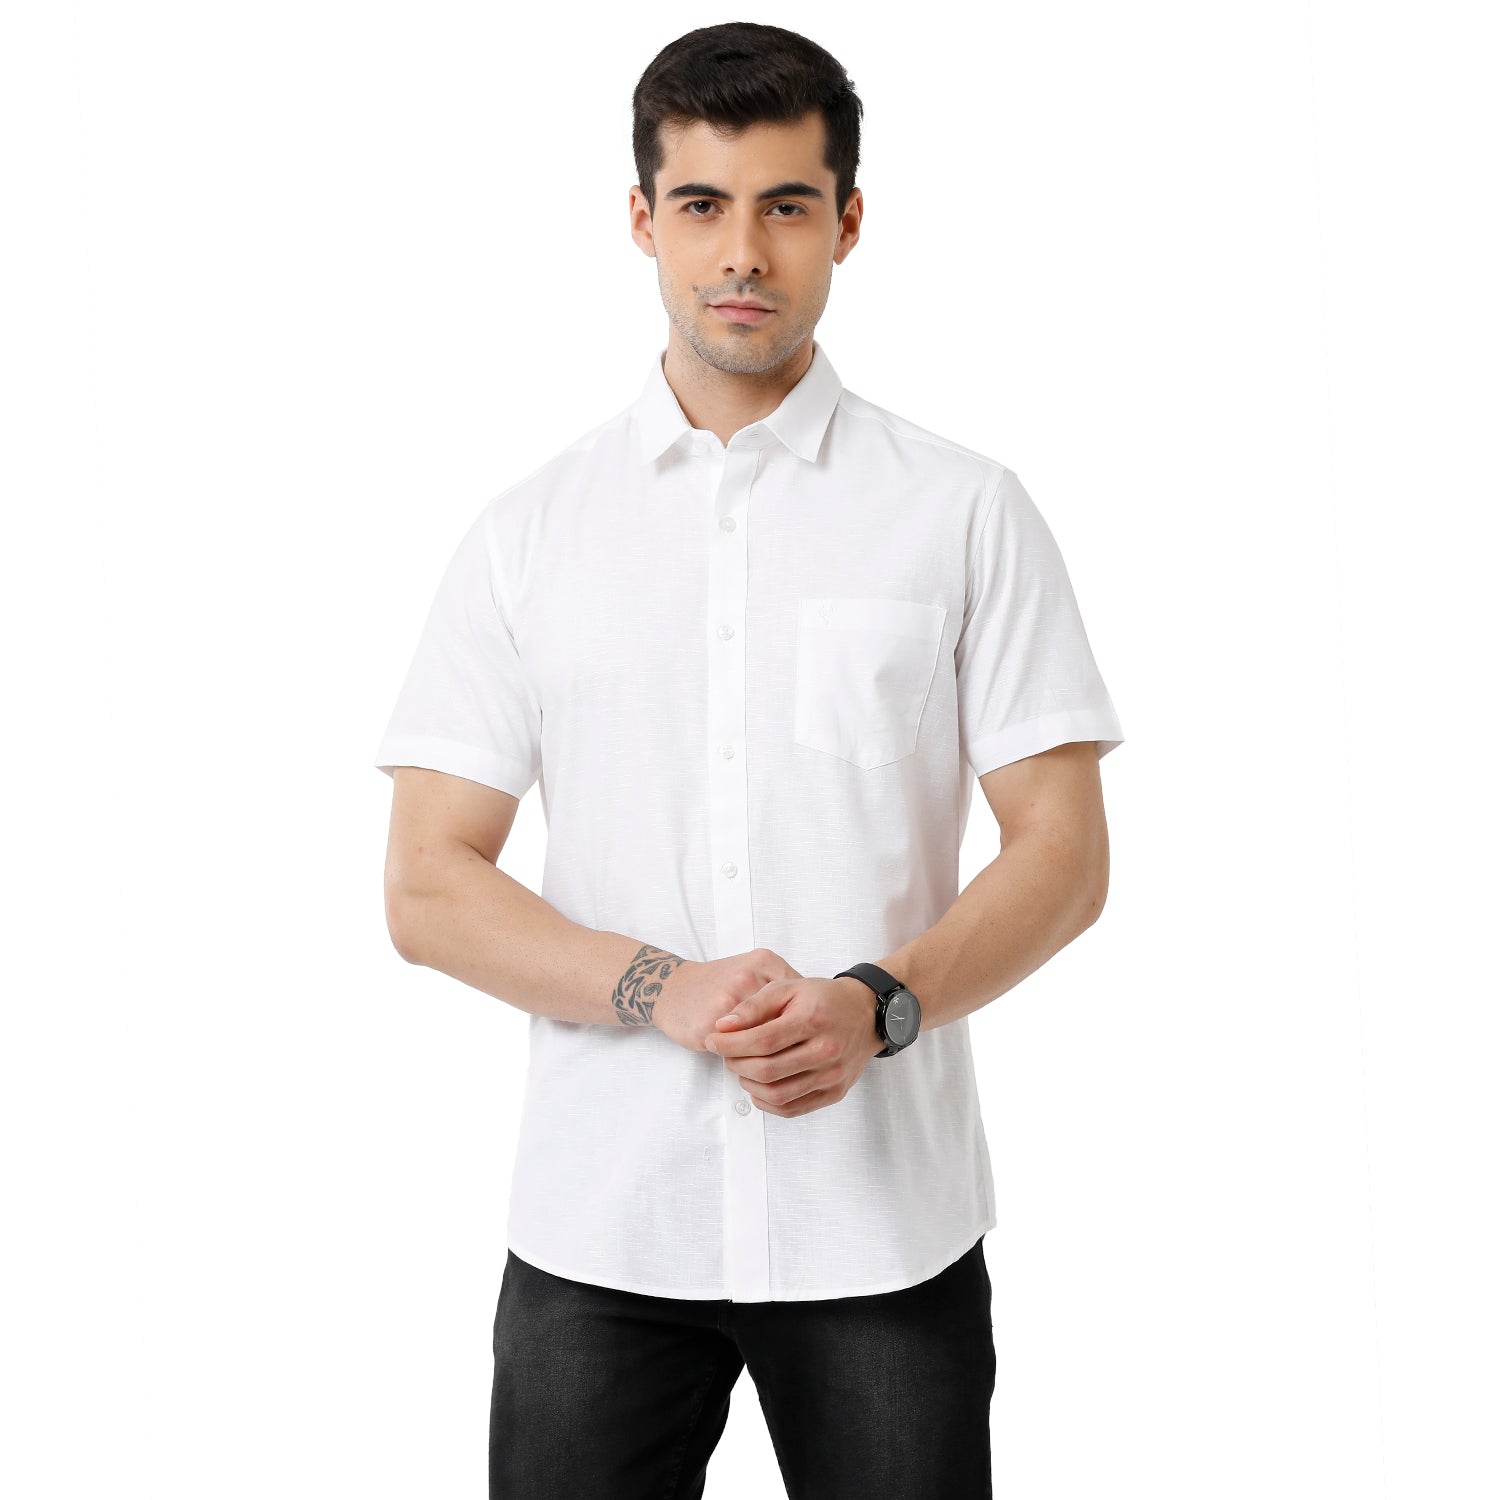 Classic Polo Mens 100% Cotton Solid Slim Fit Half Sleeve White Color Shirt - White-01 Shirts Classic Polo 